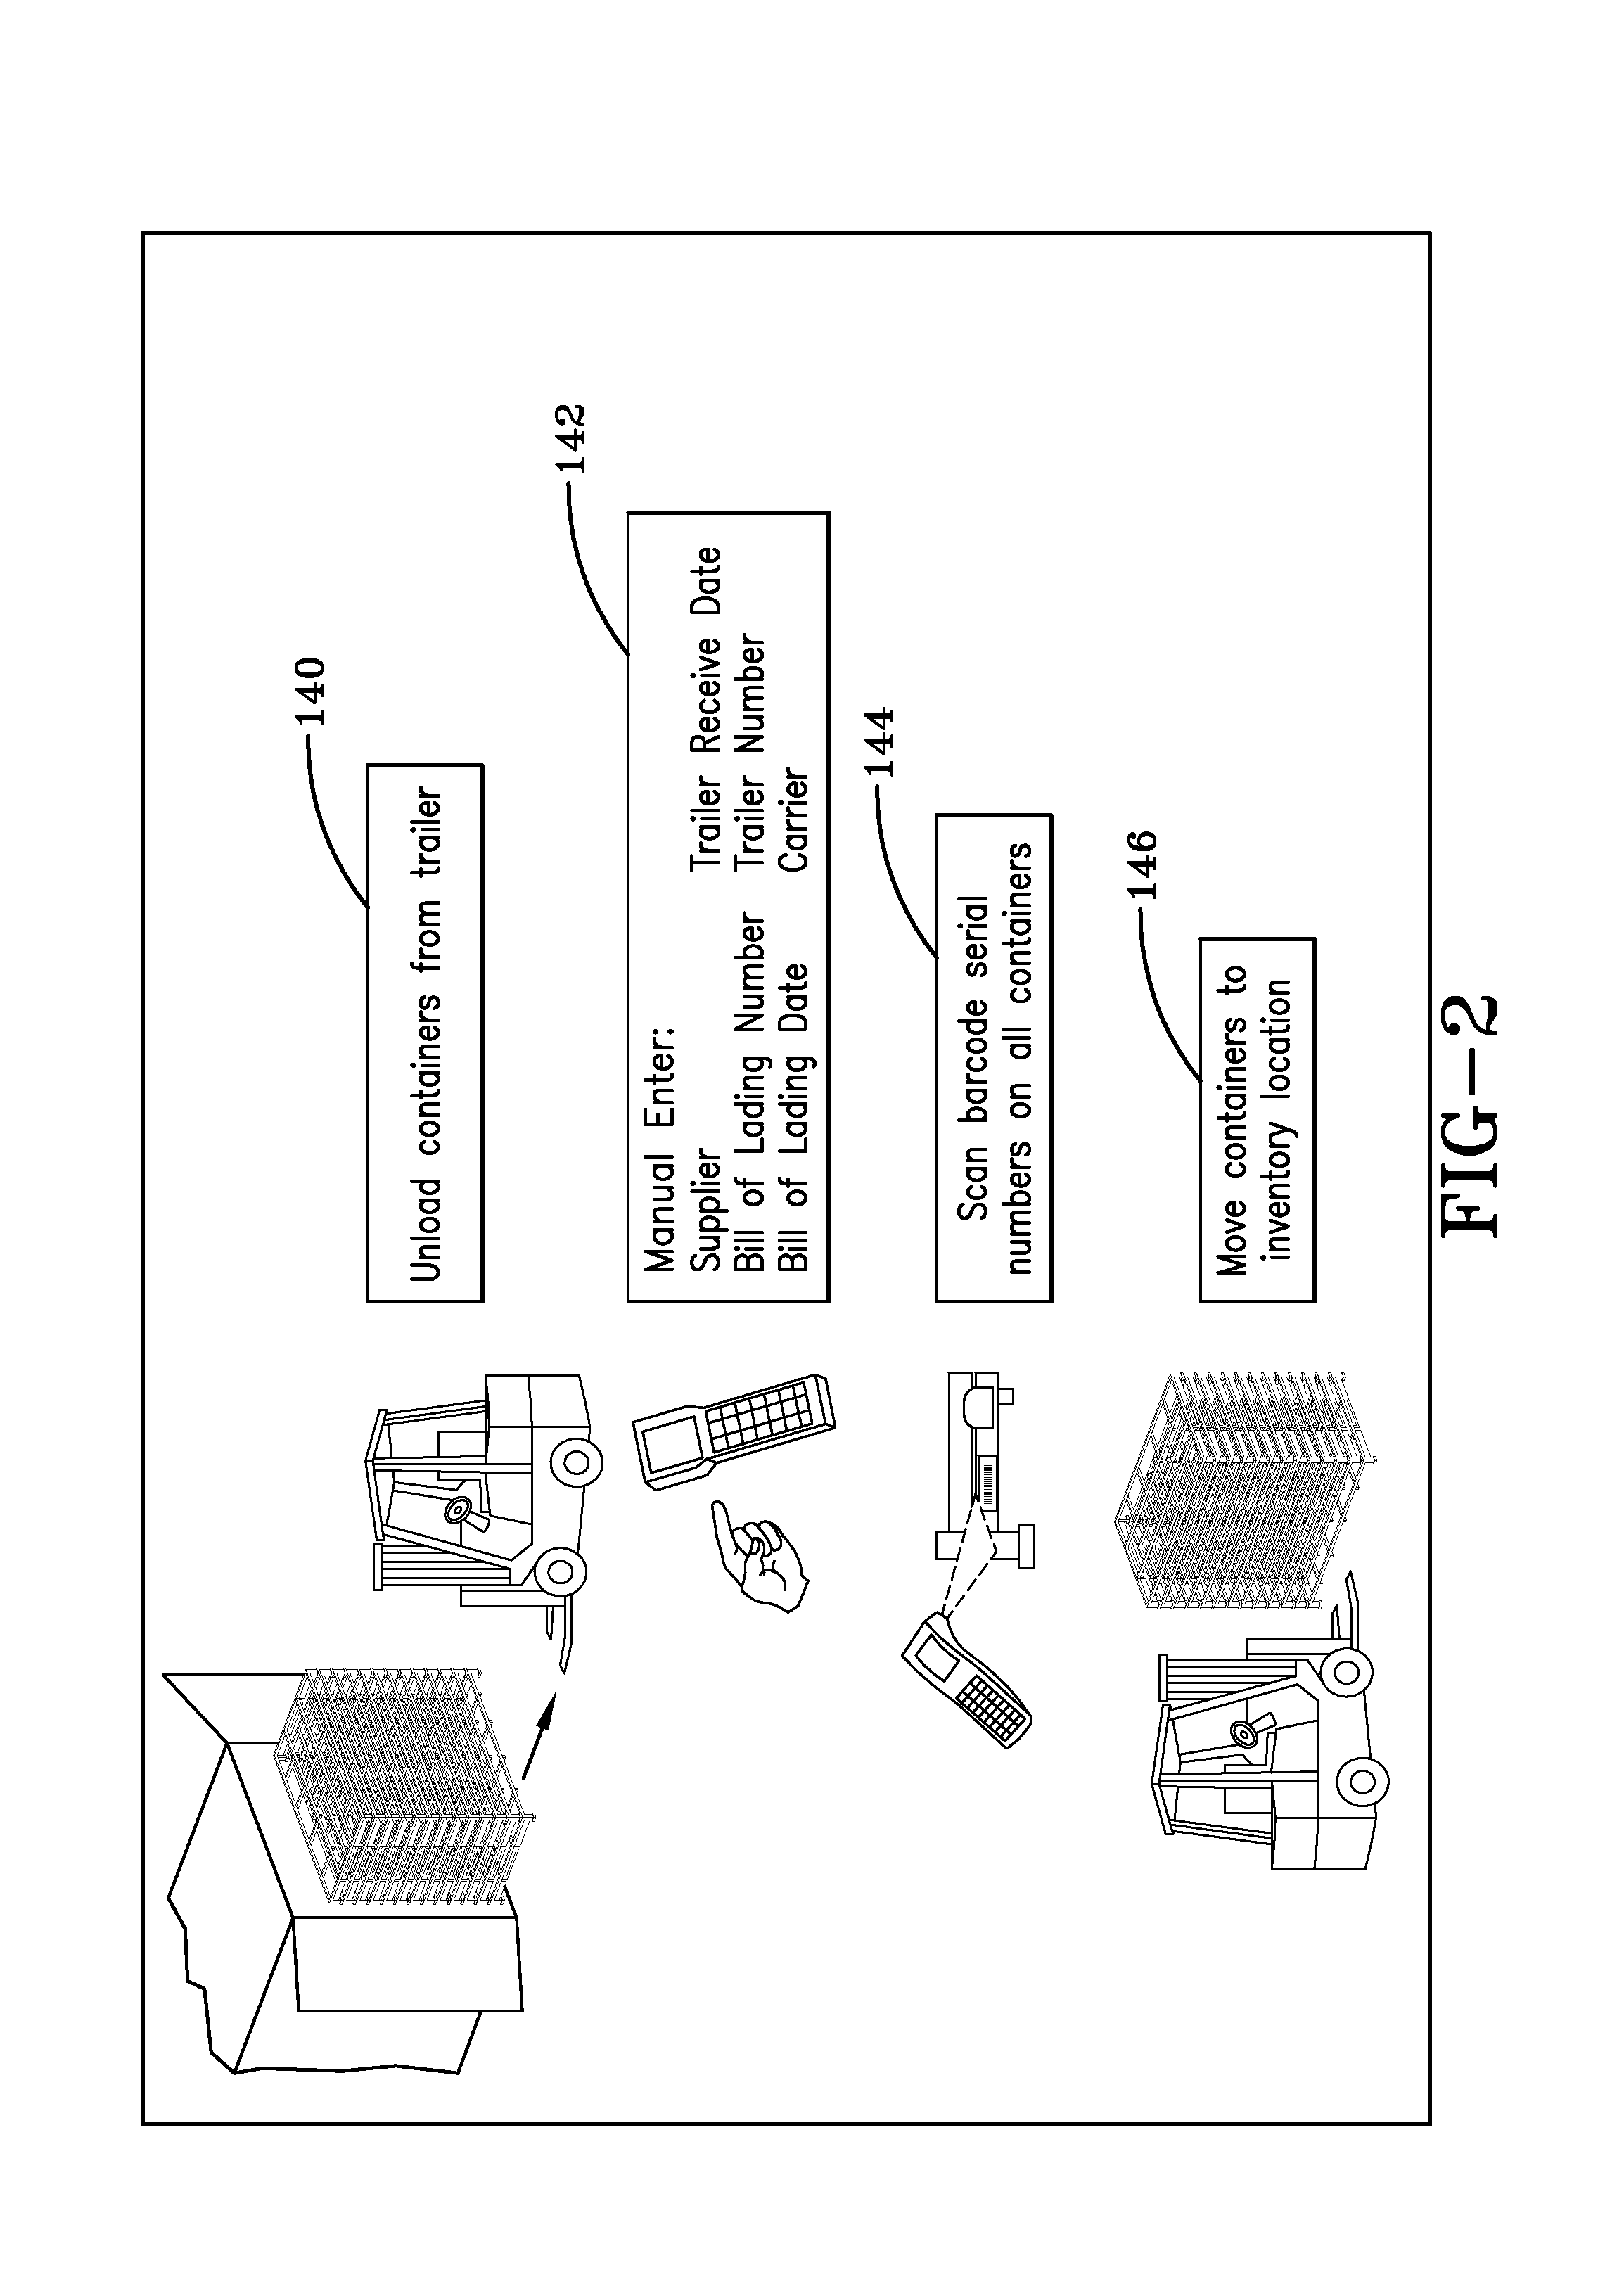 Returnable container management and repair system and method